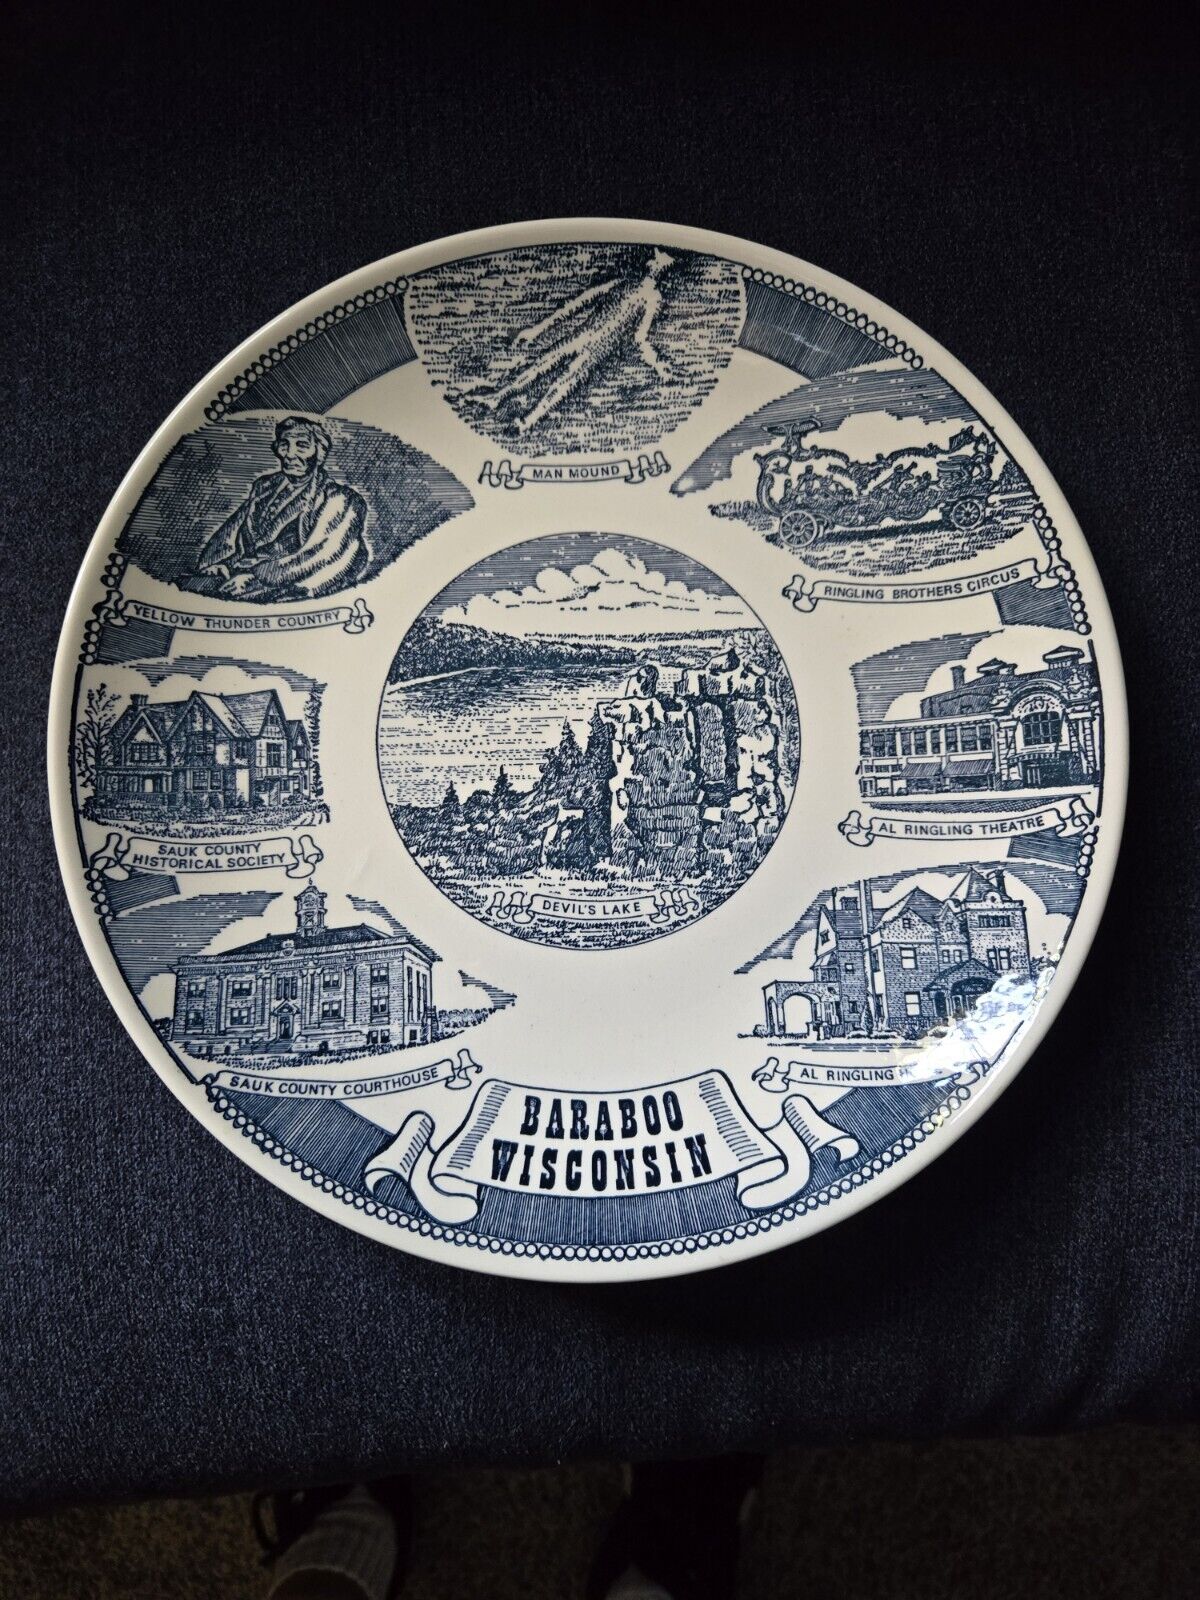 Vintage Baraboo Wisconsin Wi Souvenir Plate w Historical Scenes Ringling Circus